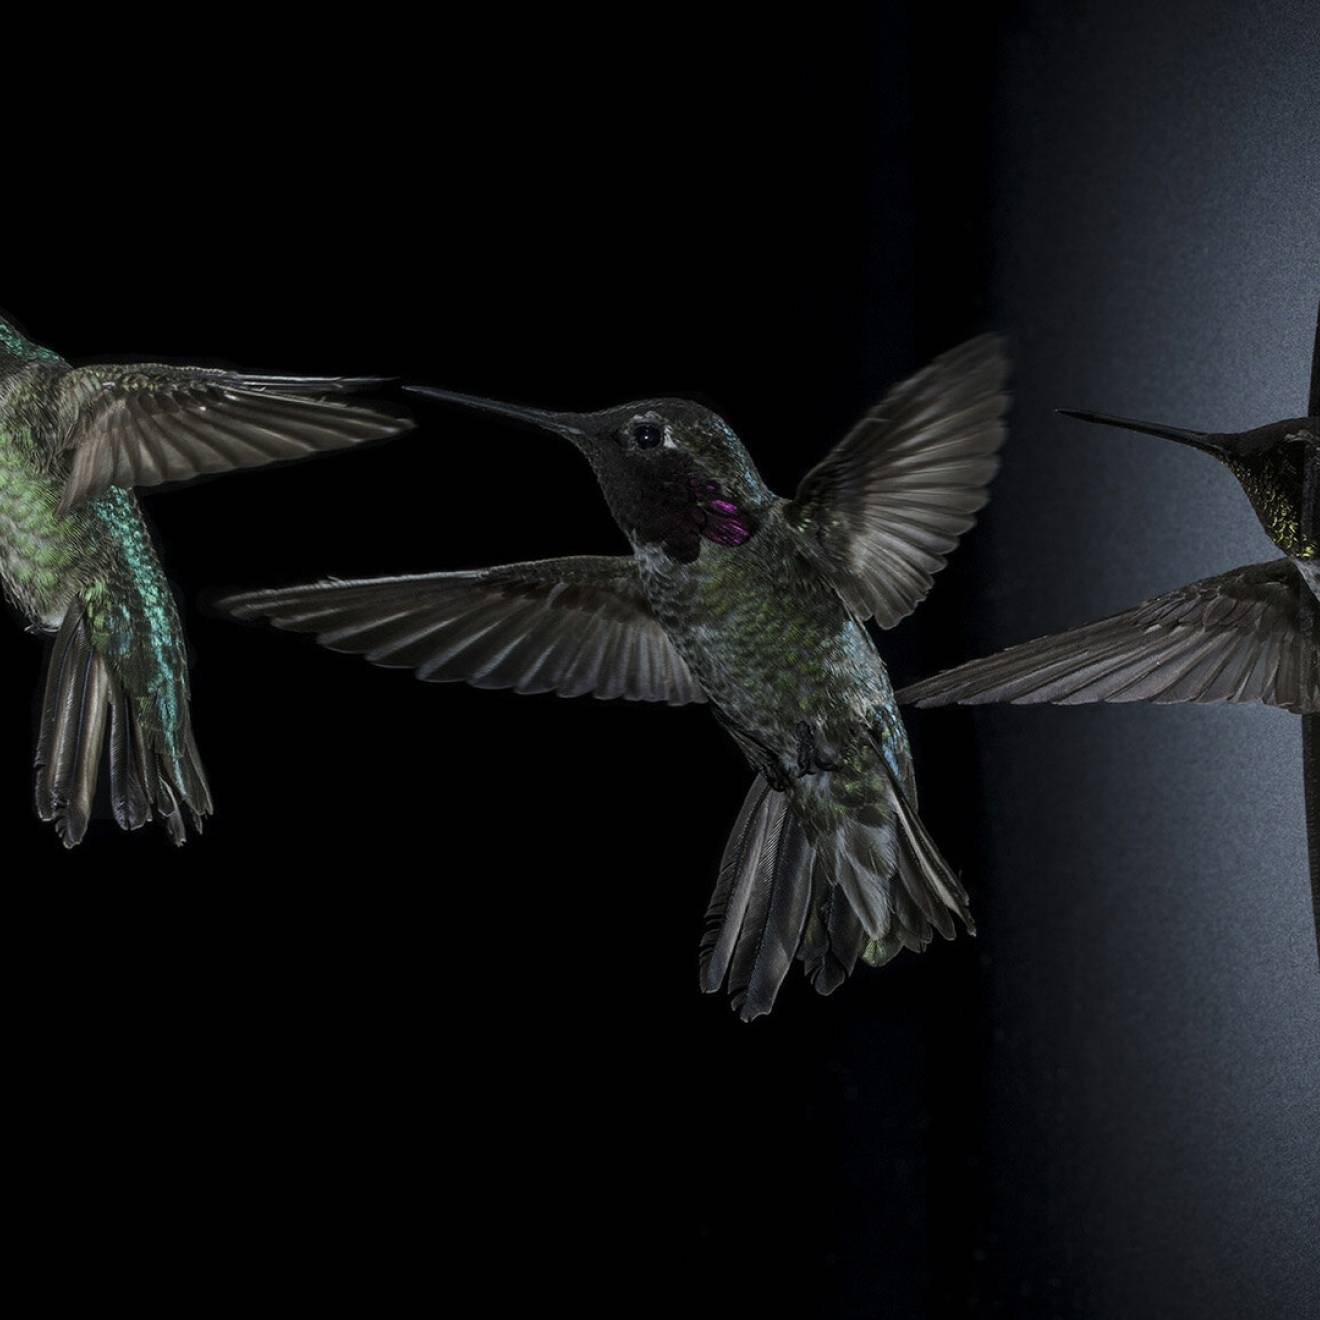 Sequential shots of an Anna's hummingbird (Calypte anna) navigating an aperture too small for its wingspan by sidling through while flapping its wings.